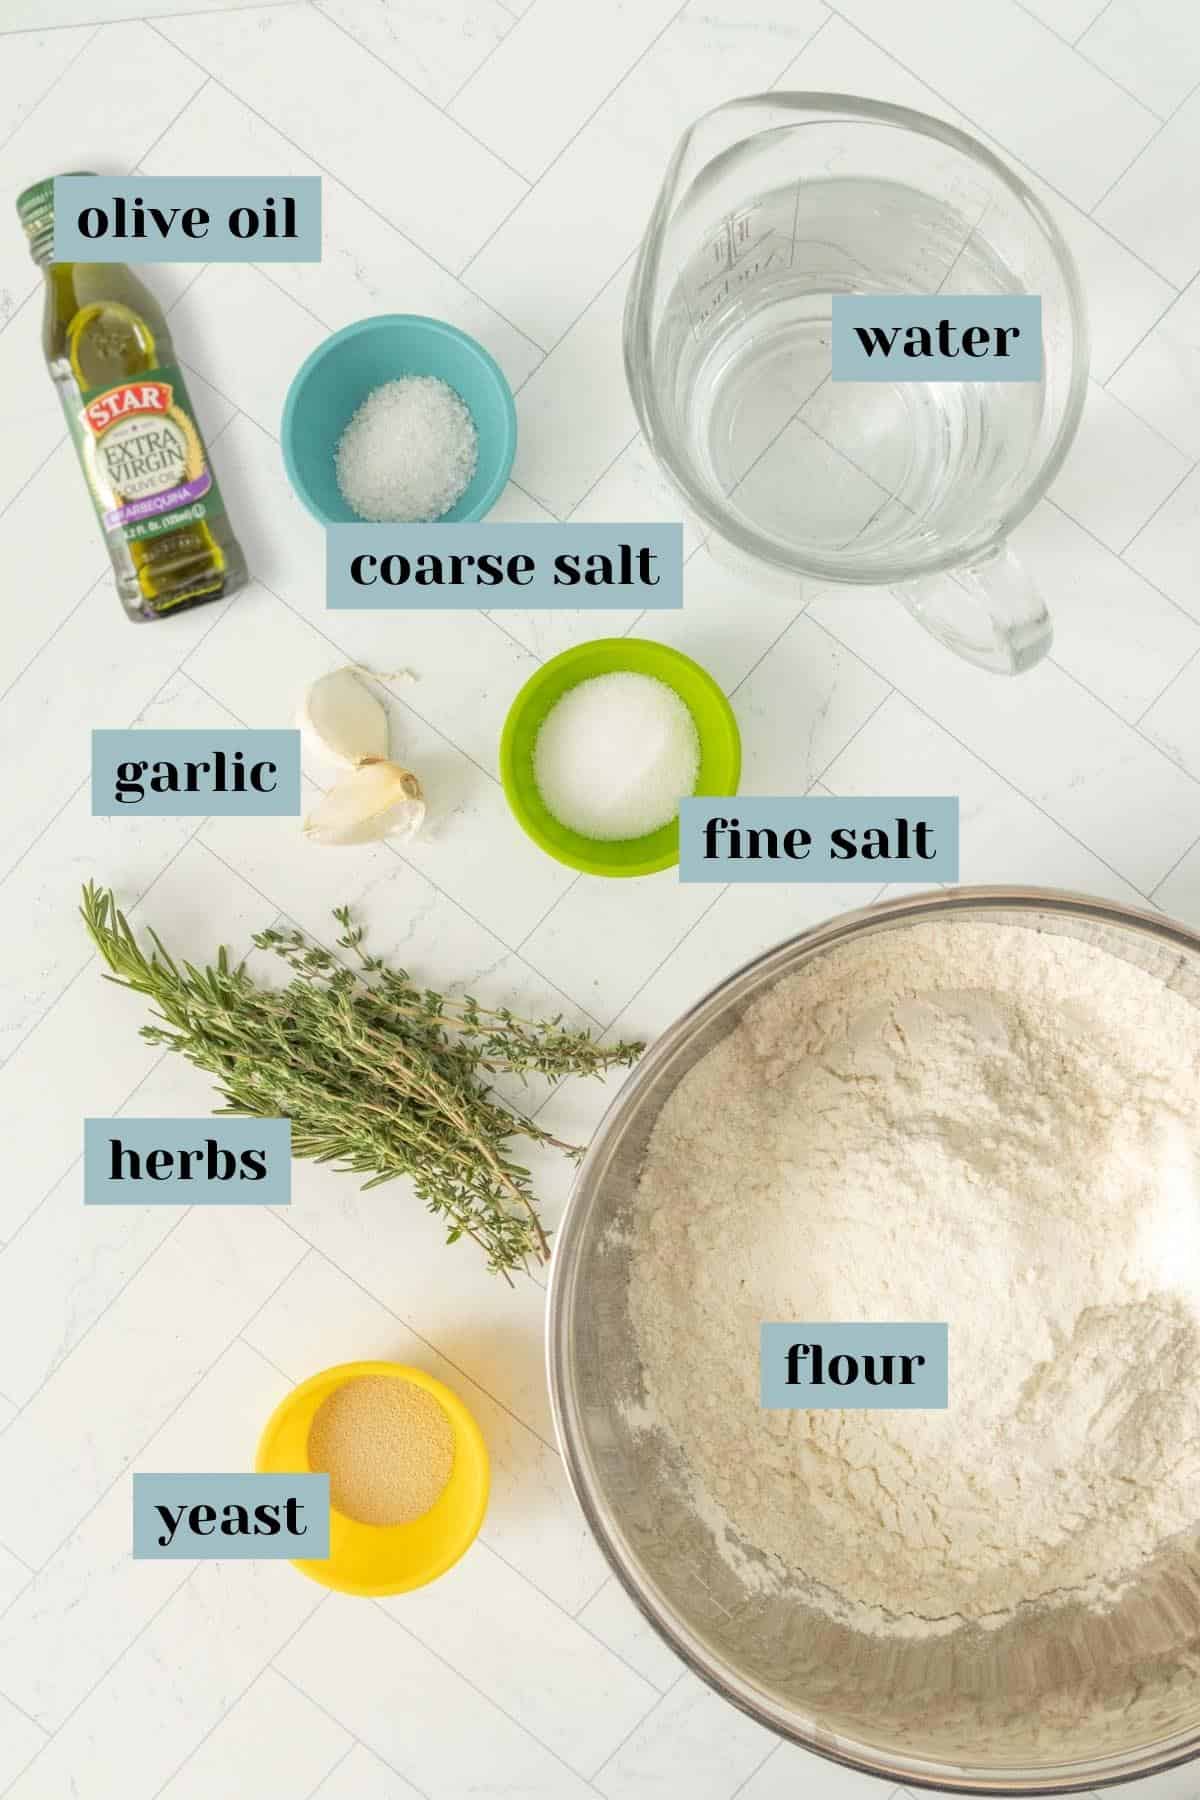 The ingredients for a recipe for rosemary bread.